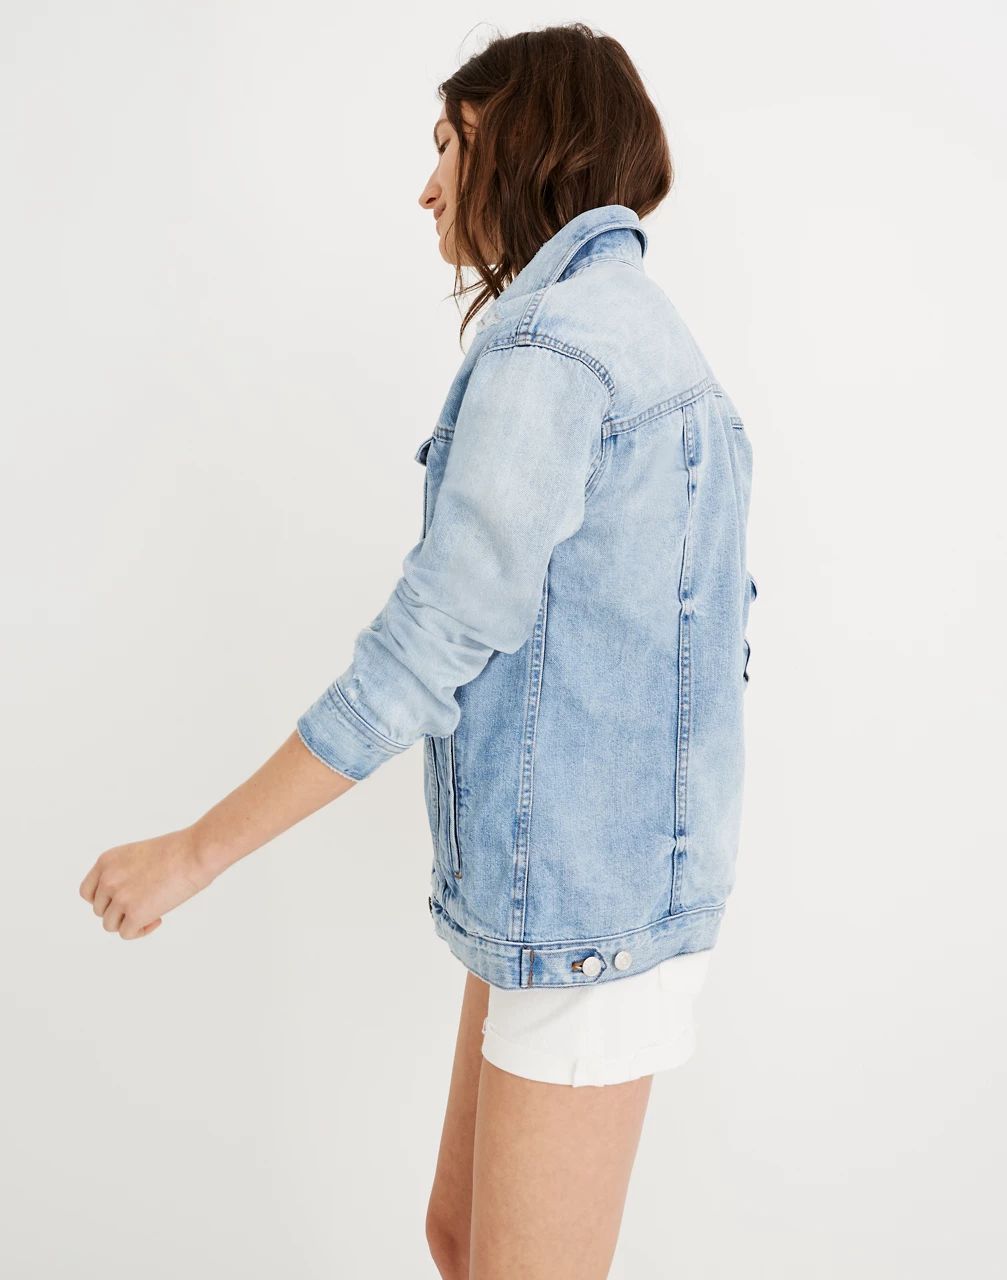 The Oversized Jean Jacket in Junction Wash: Distressed Edition | Madewell